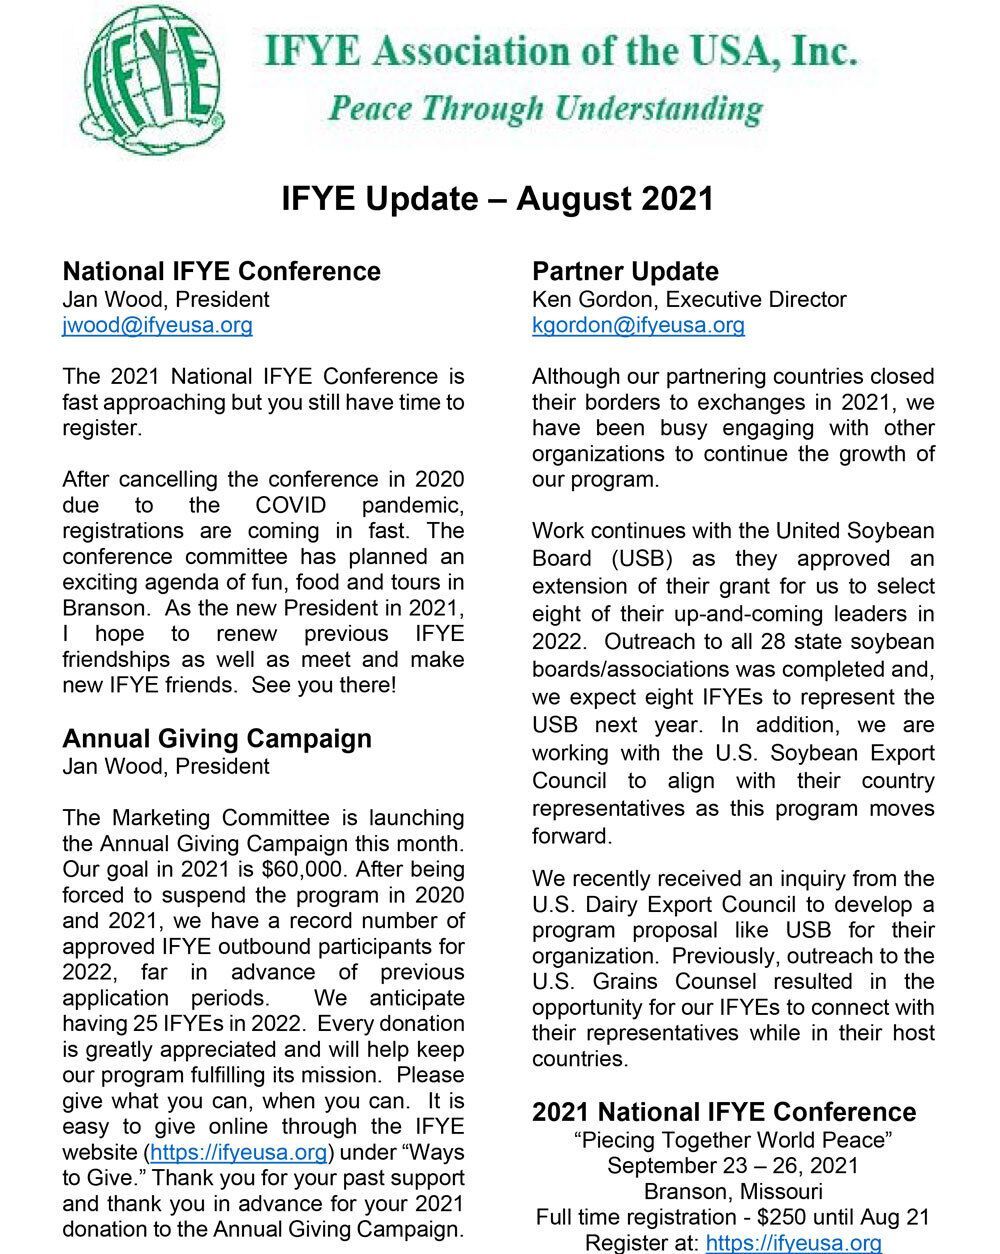 Read the August 2021 Update